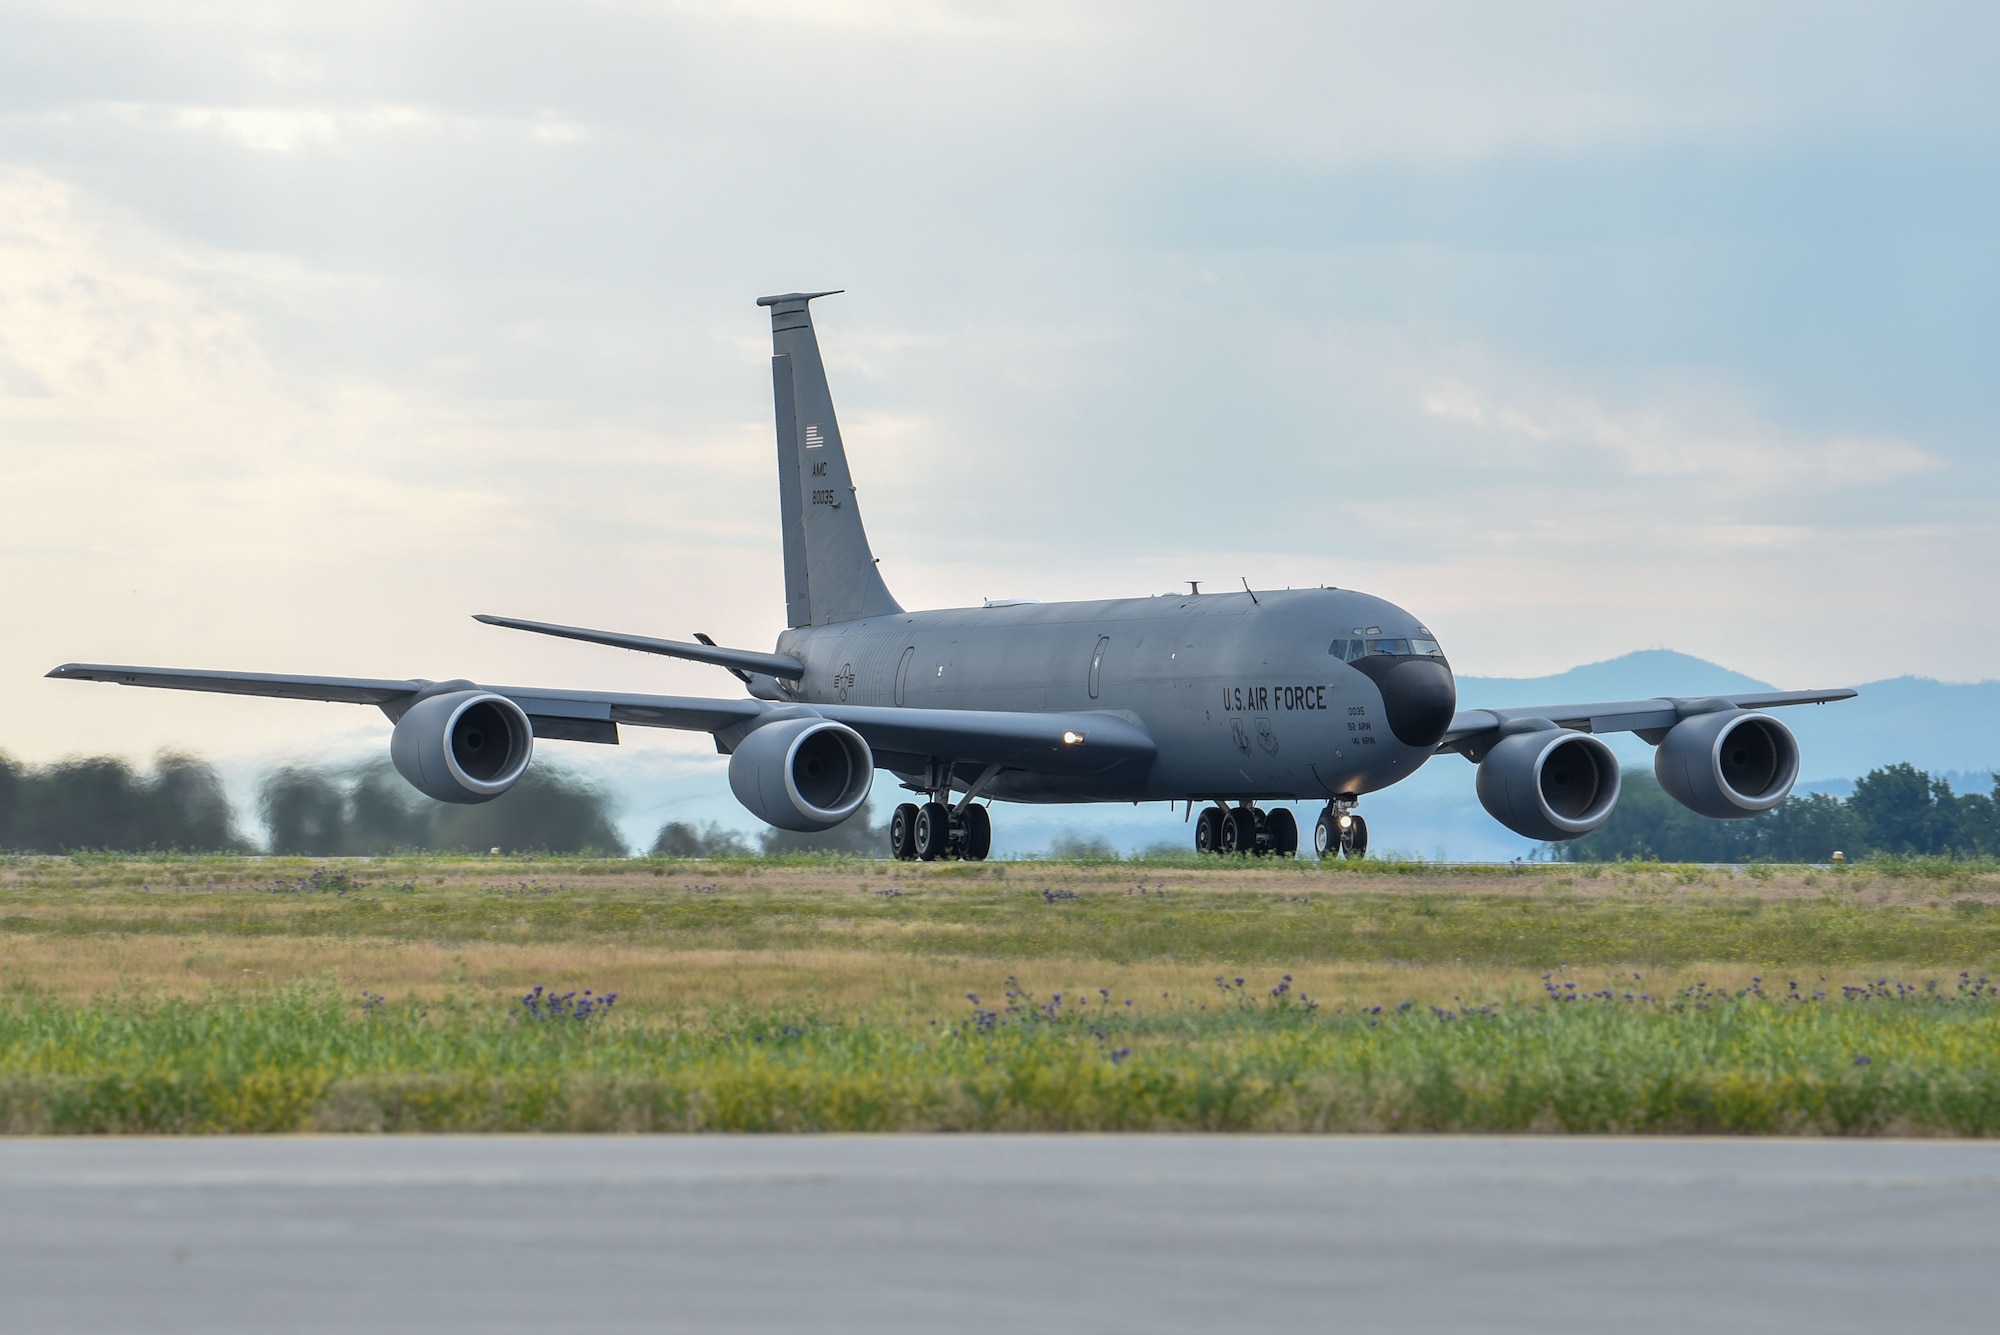 A KC-135 Stratotanker assigned to the 92nd Air Refueling Wing and 141st Air Refueling Wing taxis into position before takeoff as part of Operation Centennial Contact at Fairchild Air force Base, Washington, June 27, 2023. The movement, which included stops at Yellowstone National Park, Mount Rushmore and Glacier National Park, was part of Air Mobility Command’s celebration of 100 years air refueling operations and demonstrated the 92nd Air Refueling Wing’s global reach capabilities. Since its inception in 1923, Air refueling has become a crucial component of military and civilian aviation operations around the world by extending the range and endurance of aircraft and enabling them to complete missions that would otherwise be impossible or require multiple stops. As a result, this capability is essential for strategic and tactical operations, as well as humanitarian relief efforts in support of AMC, U.S. Transportation Command and Department of Defense priorities. (U.S. Air Force photo by Airman 1st Class Lillian Patterson)